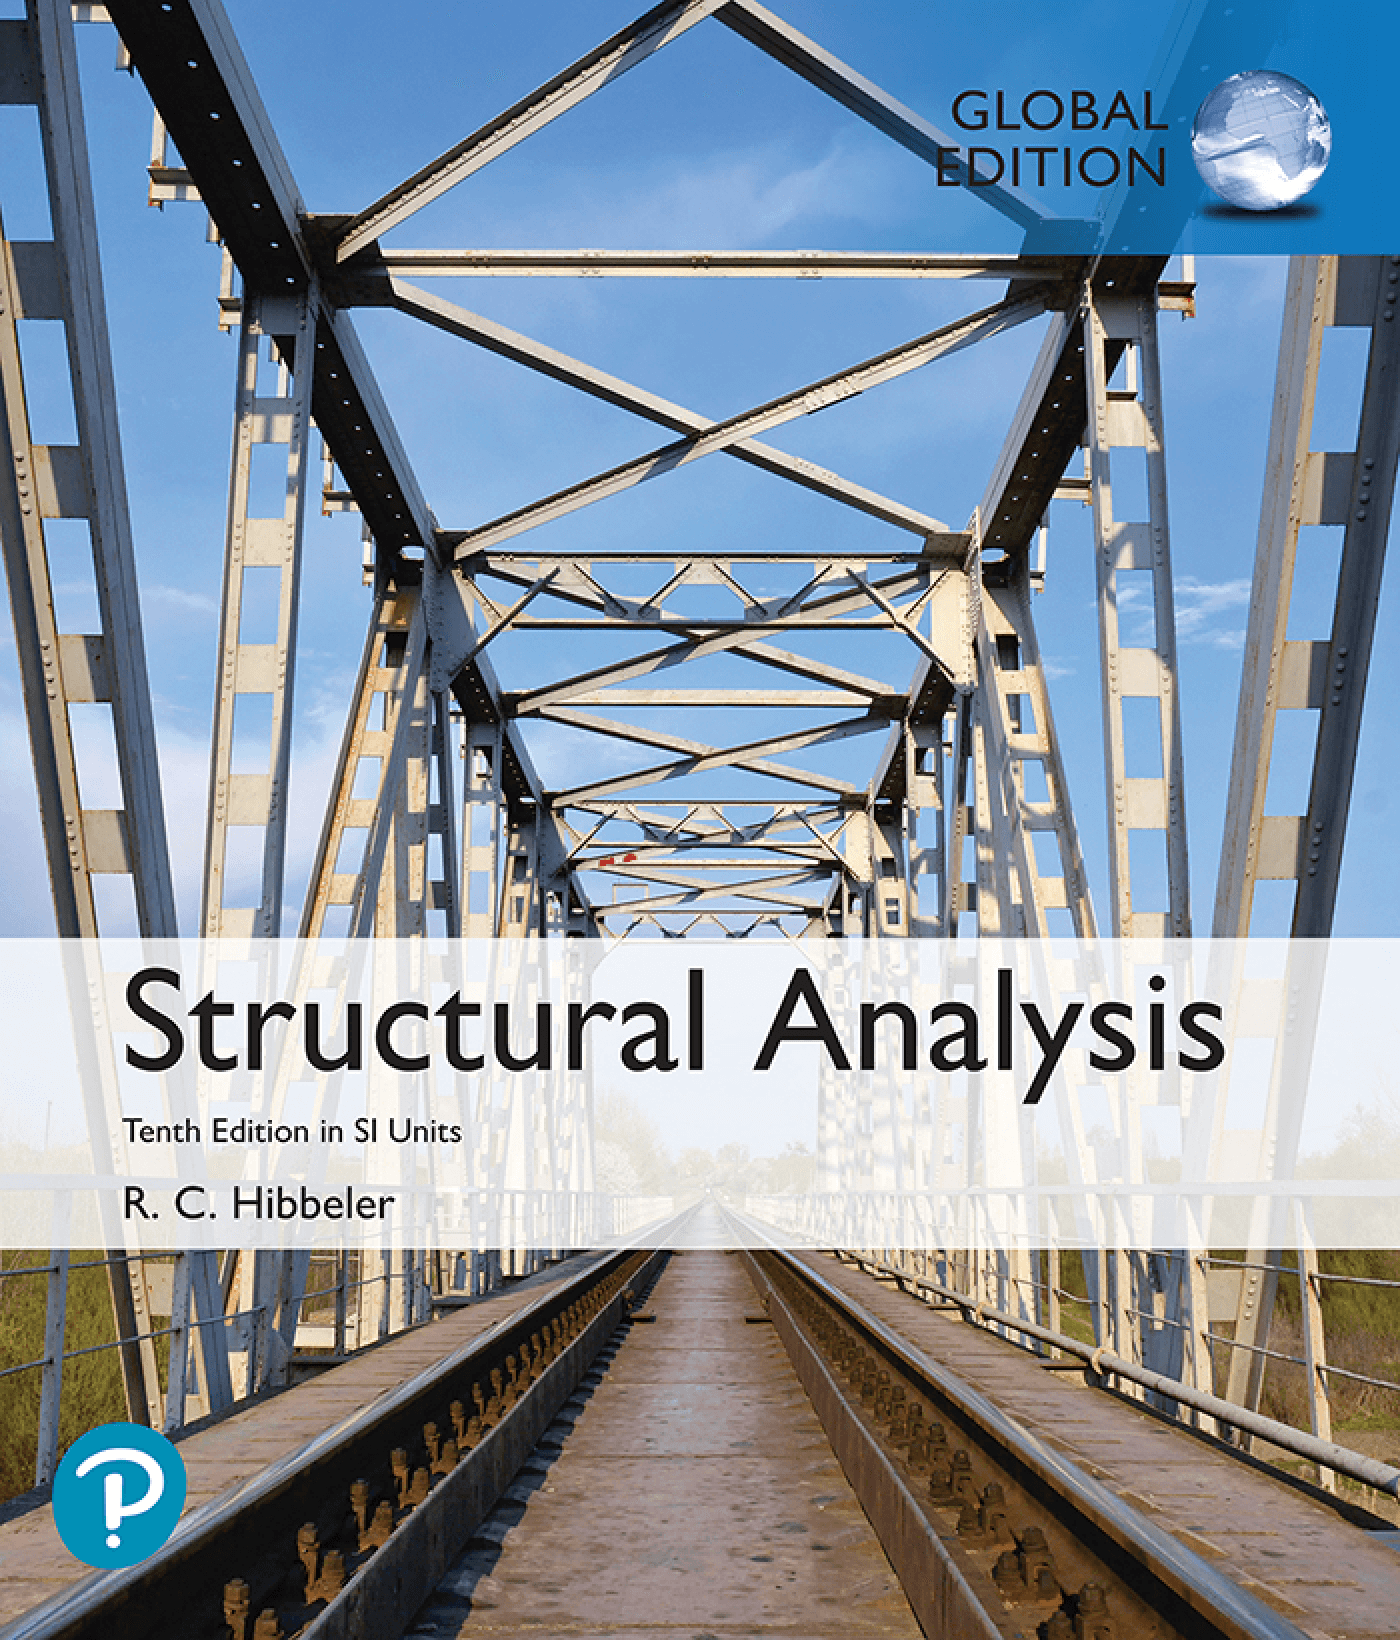 Structural Analysis 10th Edition SI Units Hibbeler